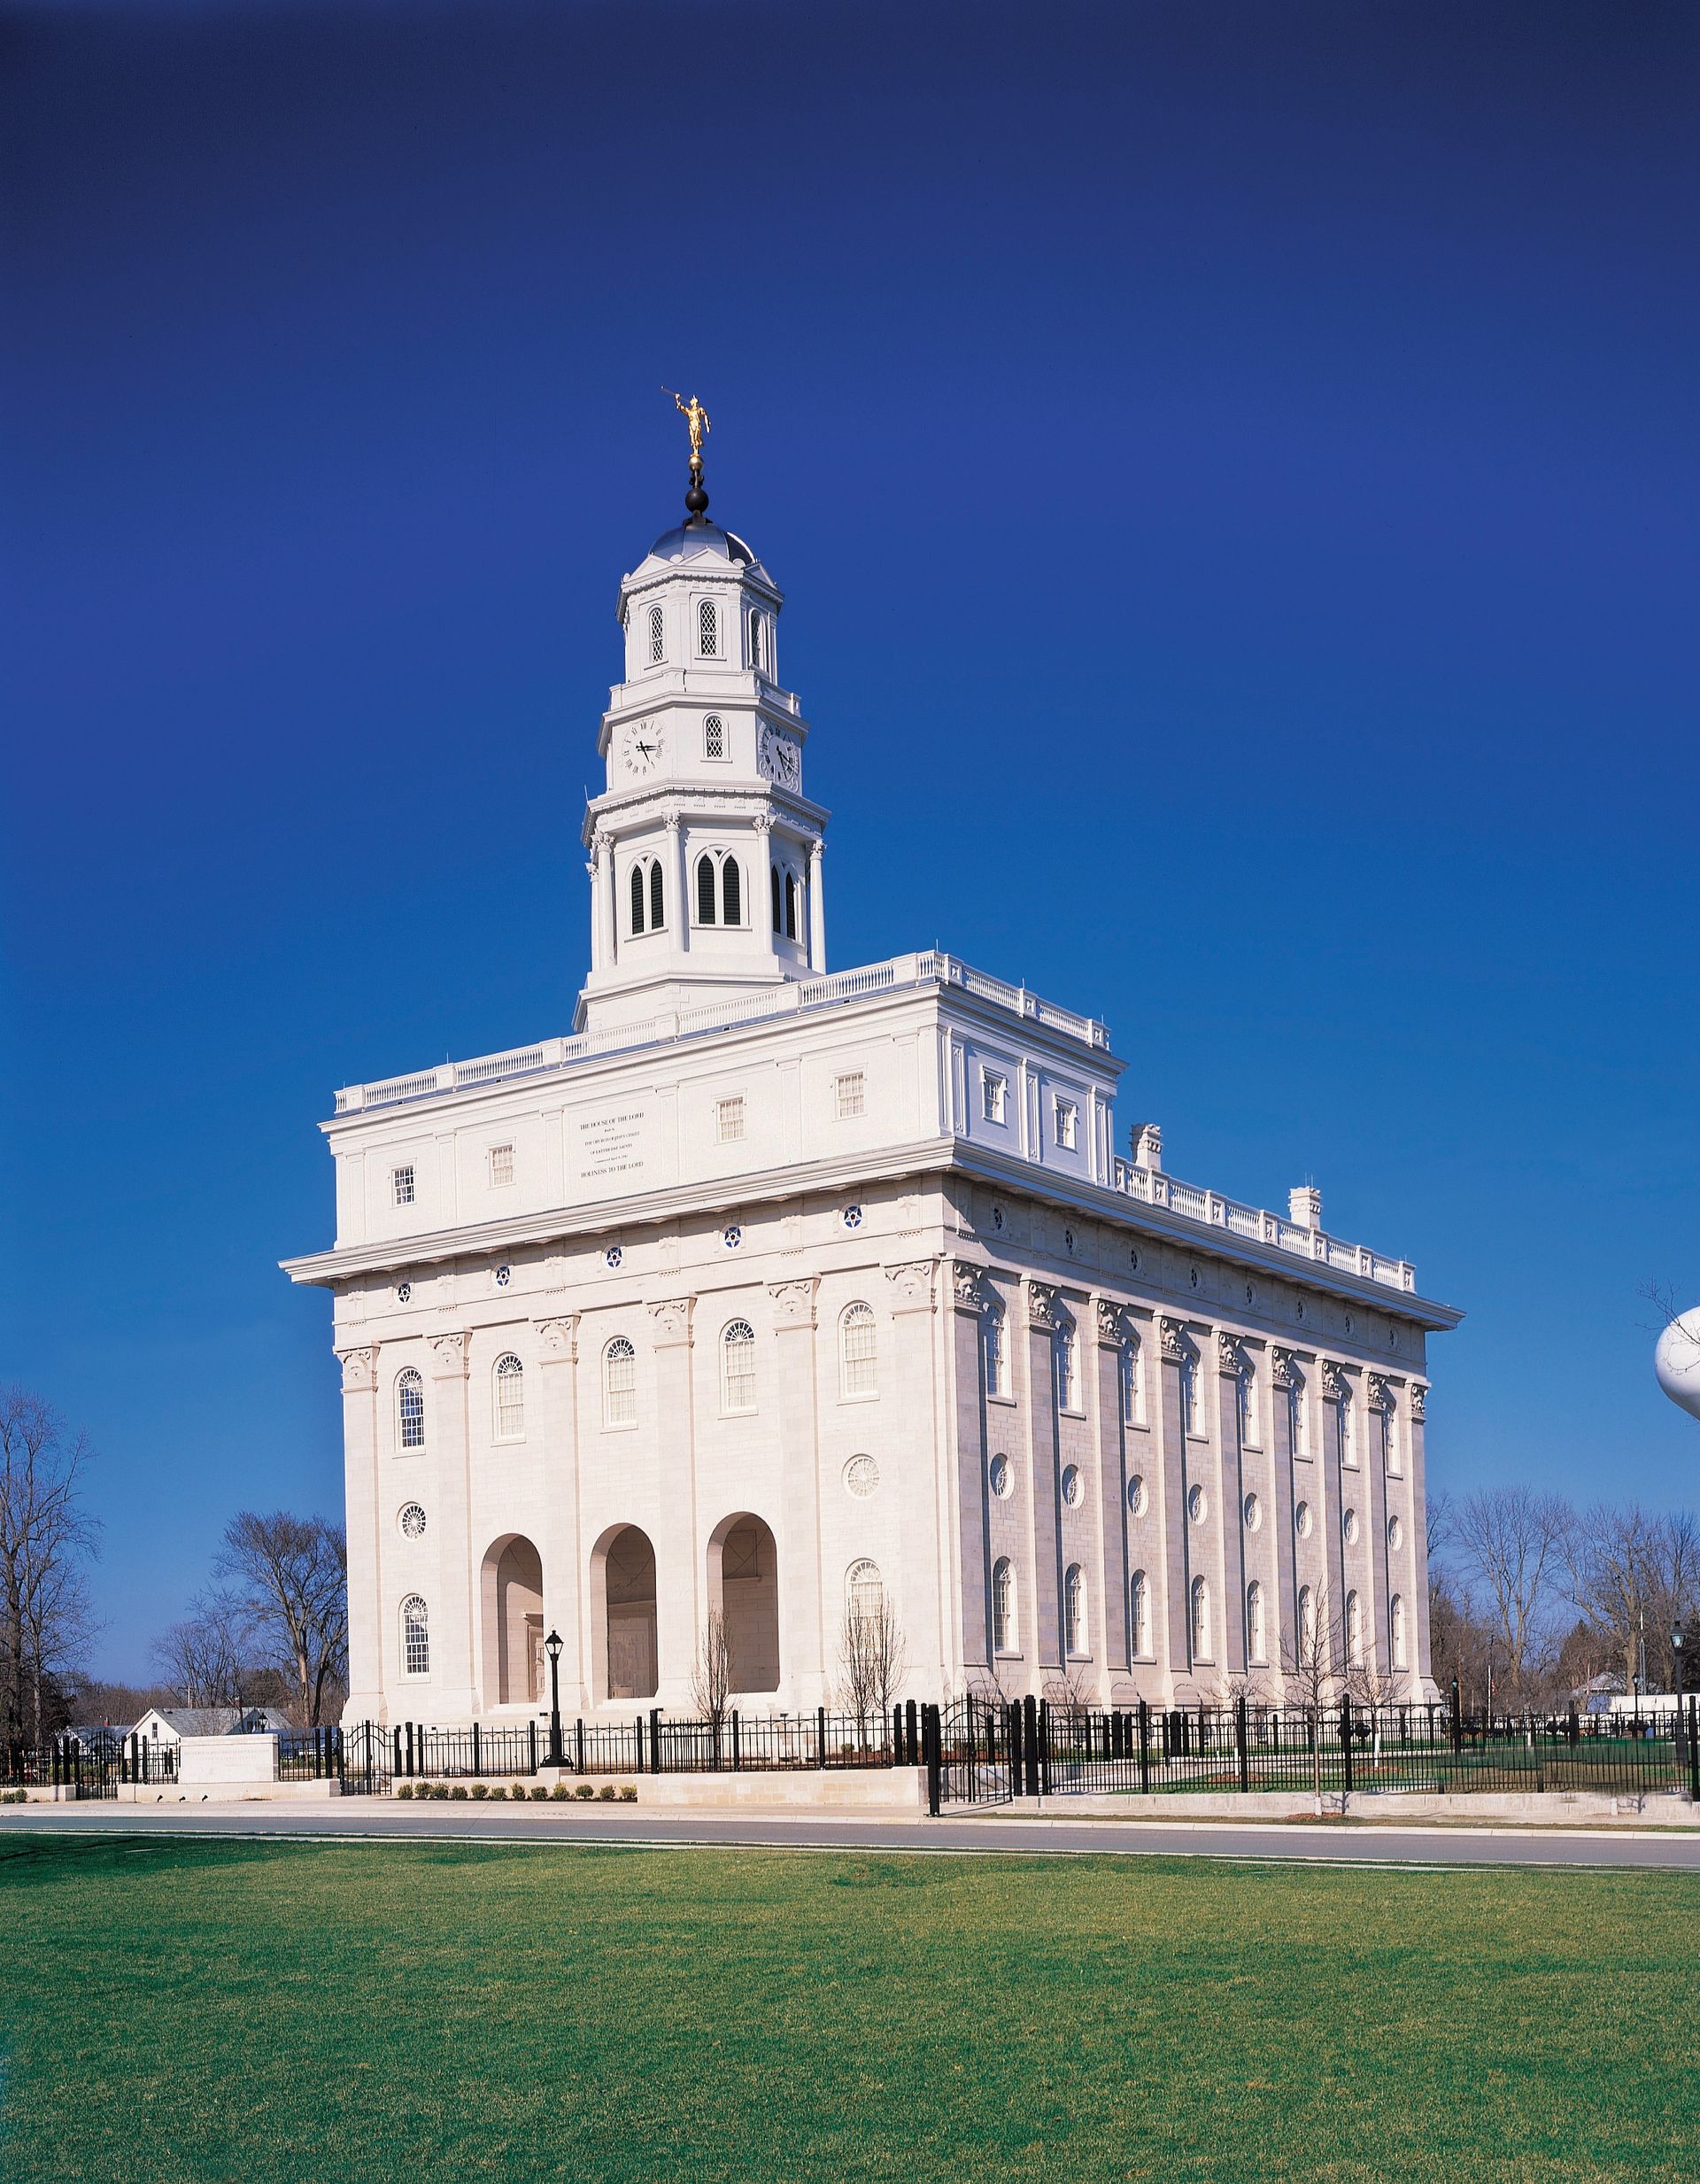 The Nauvoo Illinois Temple, including the entrance and scenery.